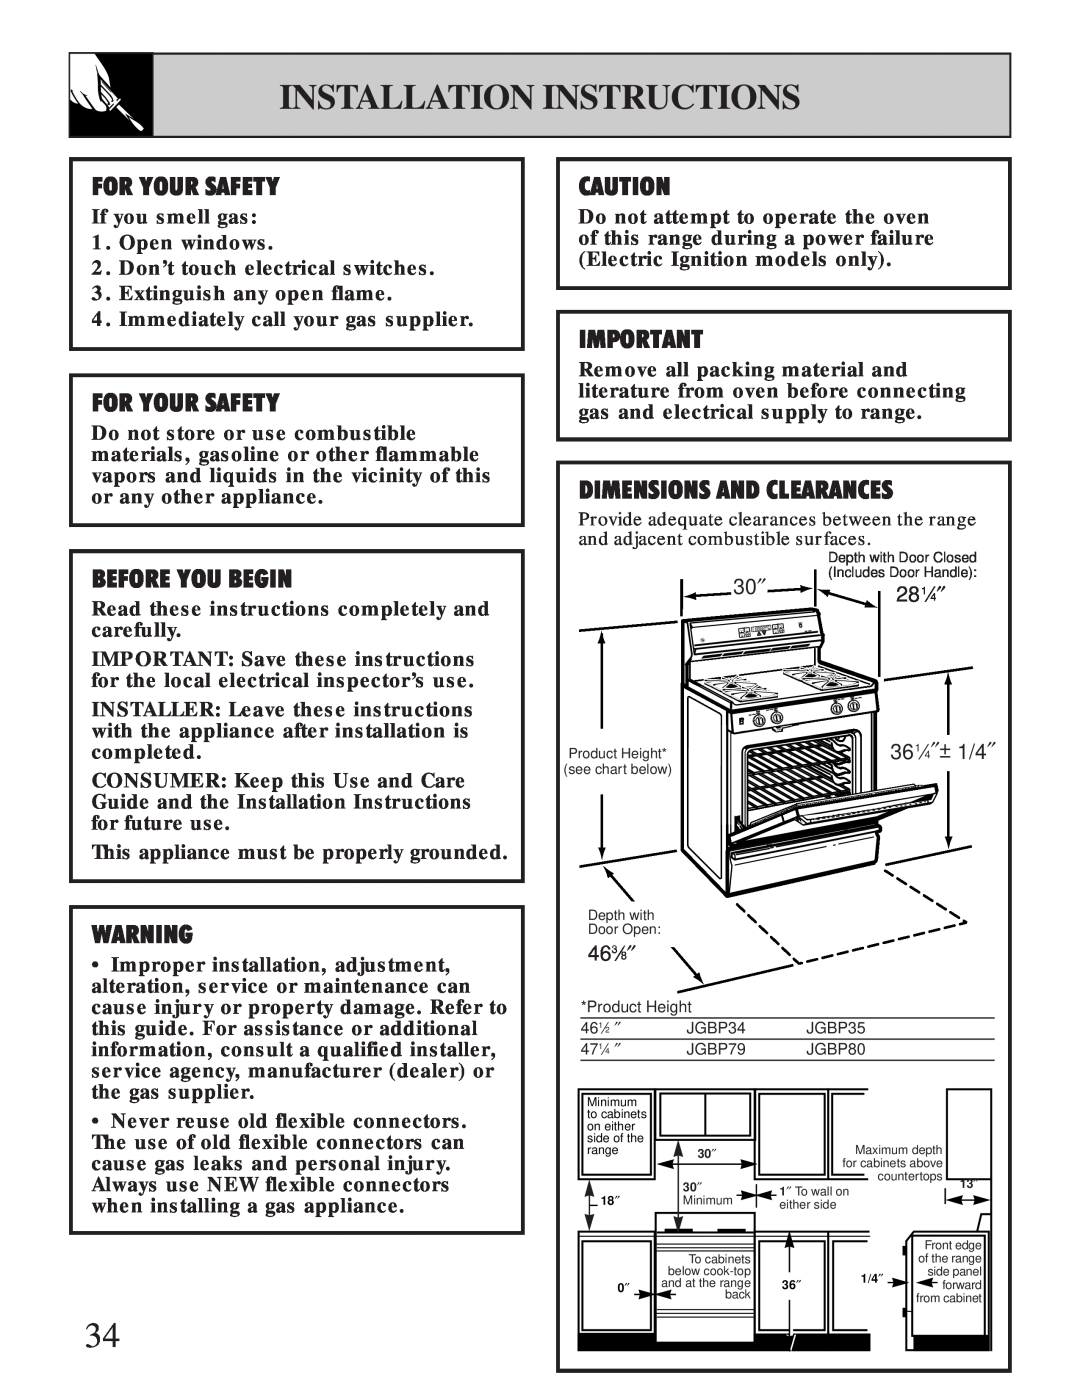 GE XL44 installation instructions Installation Instructions, For Your Safety, Before You Begin, Dimensions And Clearances 